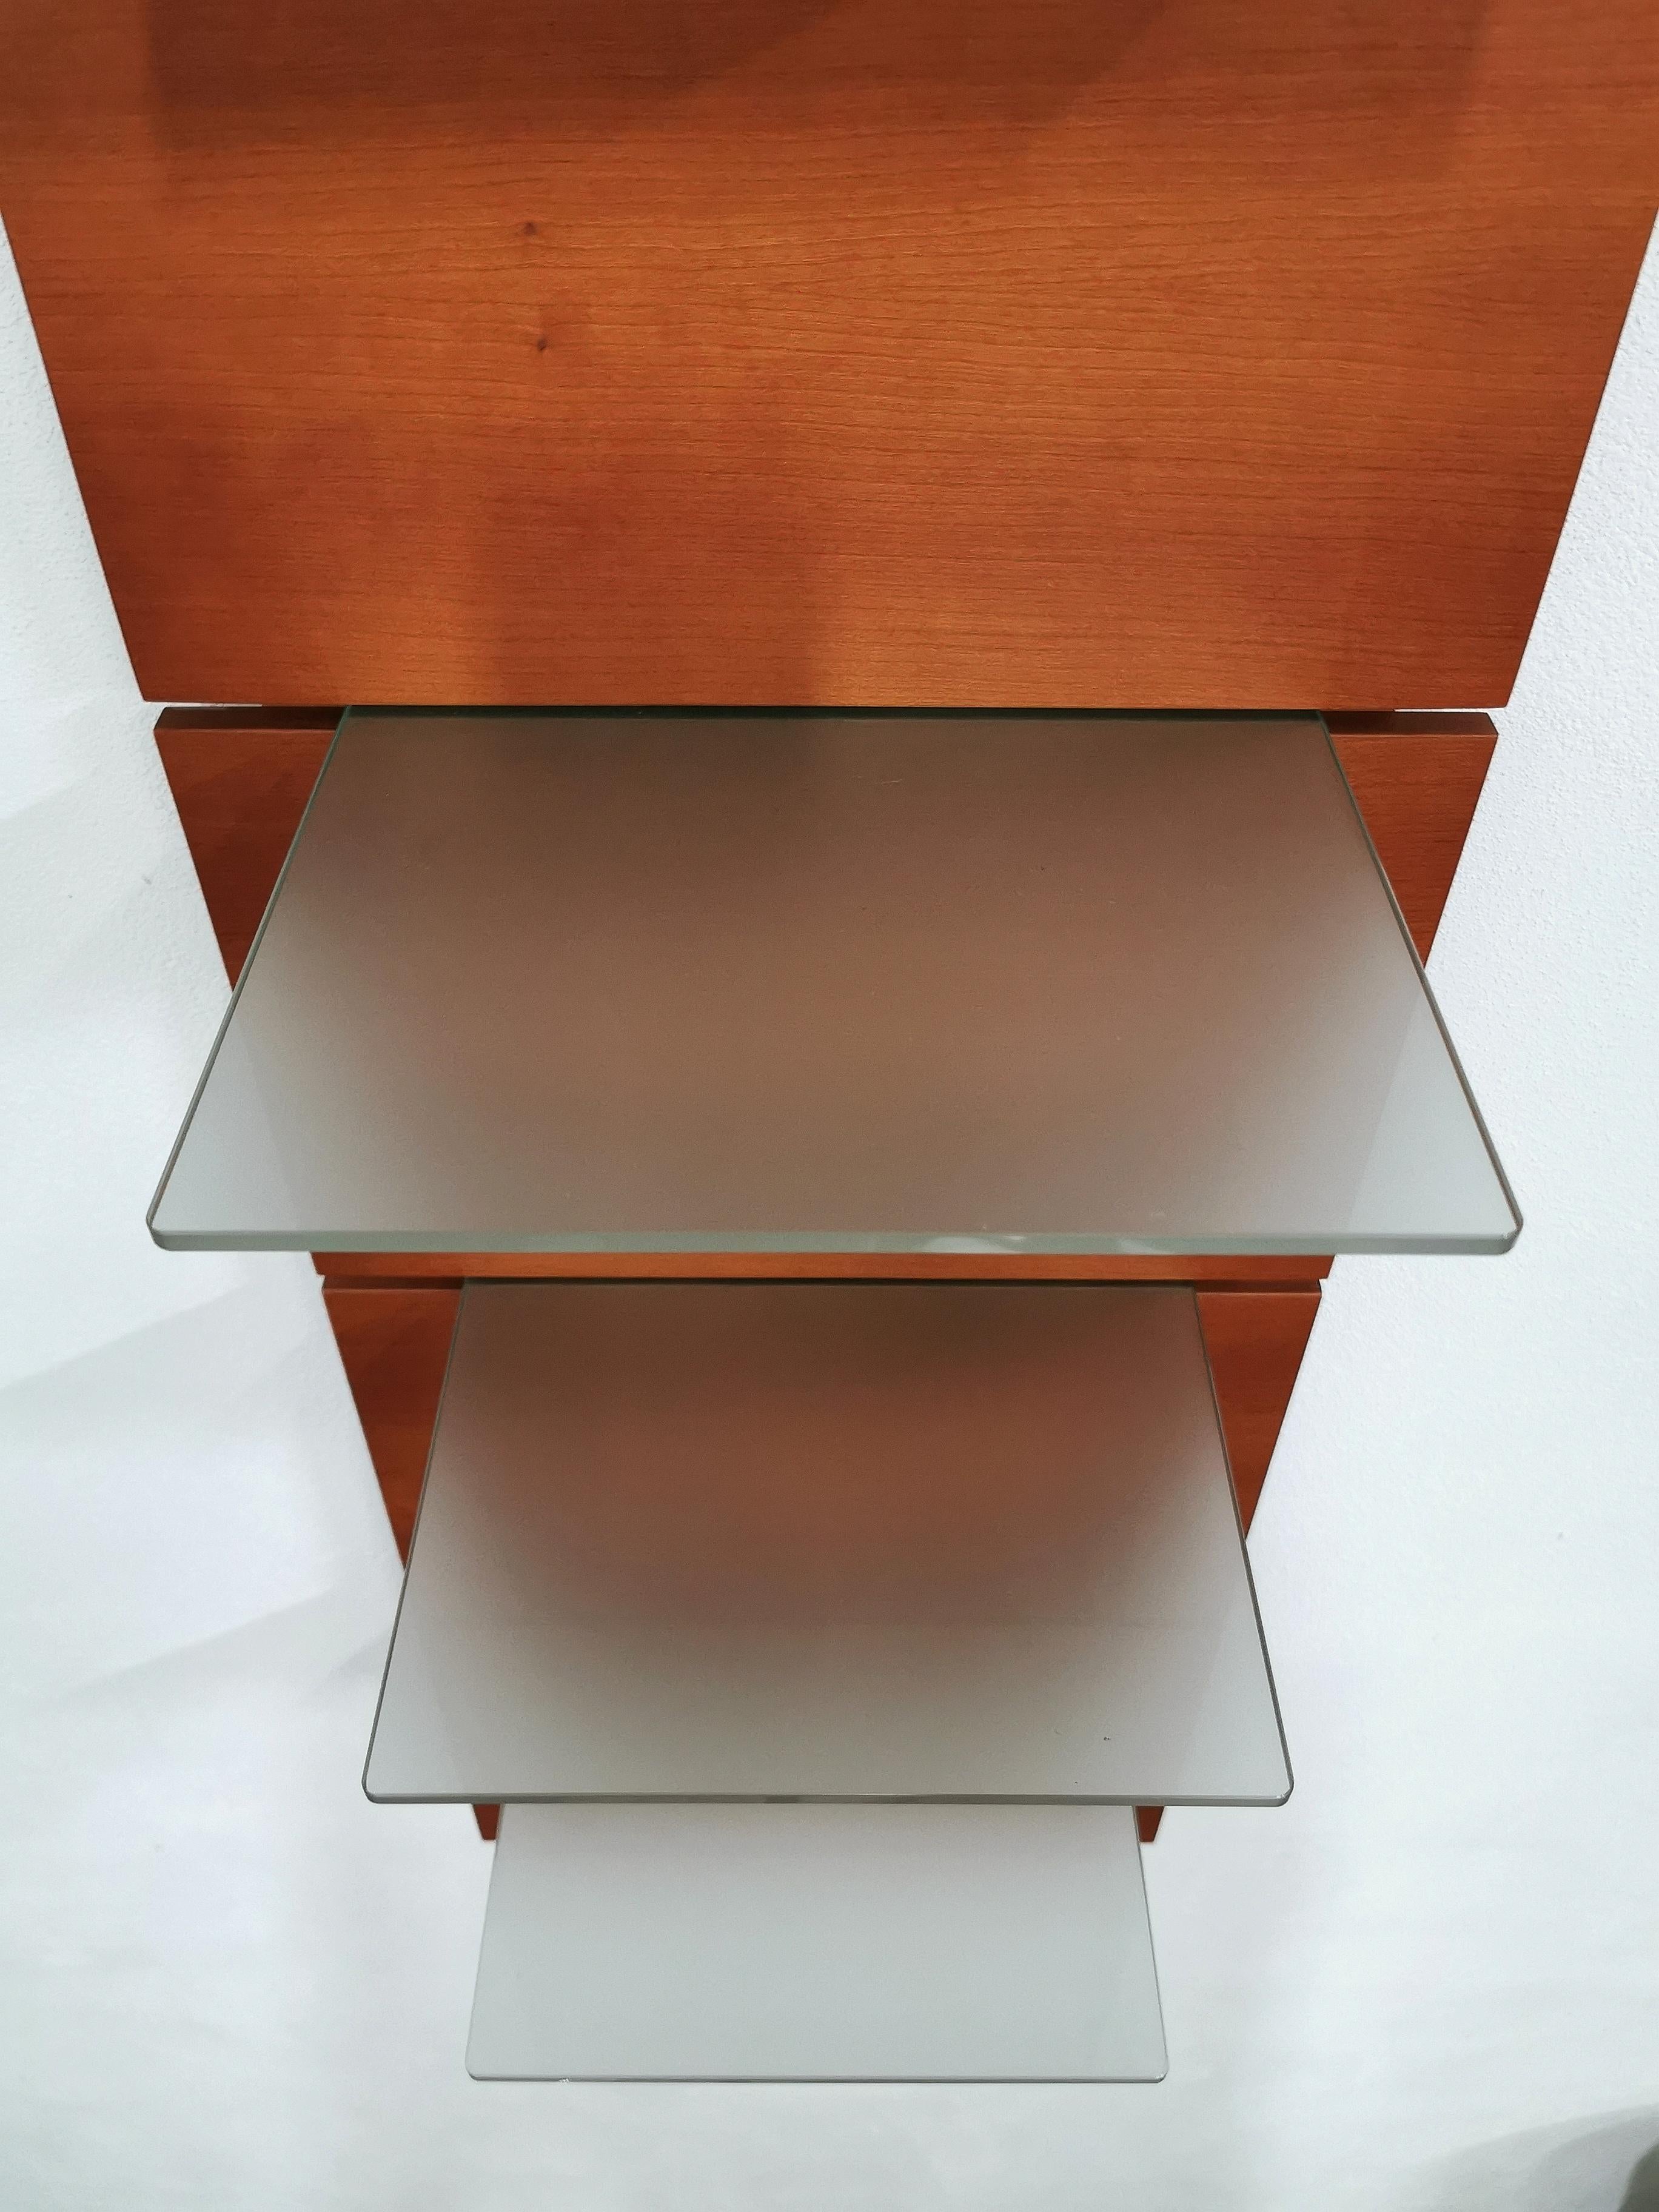 Post-Modern Modern Shelves Wall Cabinets Cherrywood Tempered Glass Calligaris 1990s Set of 2